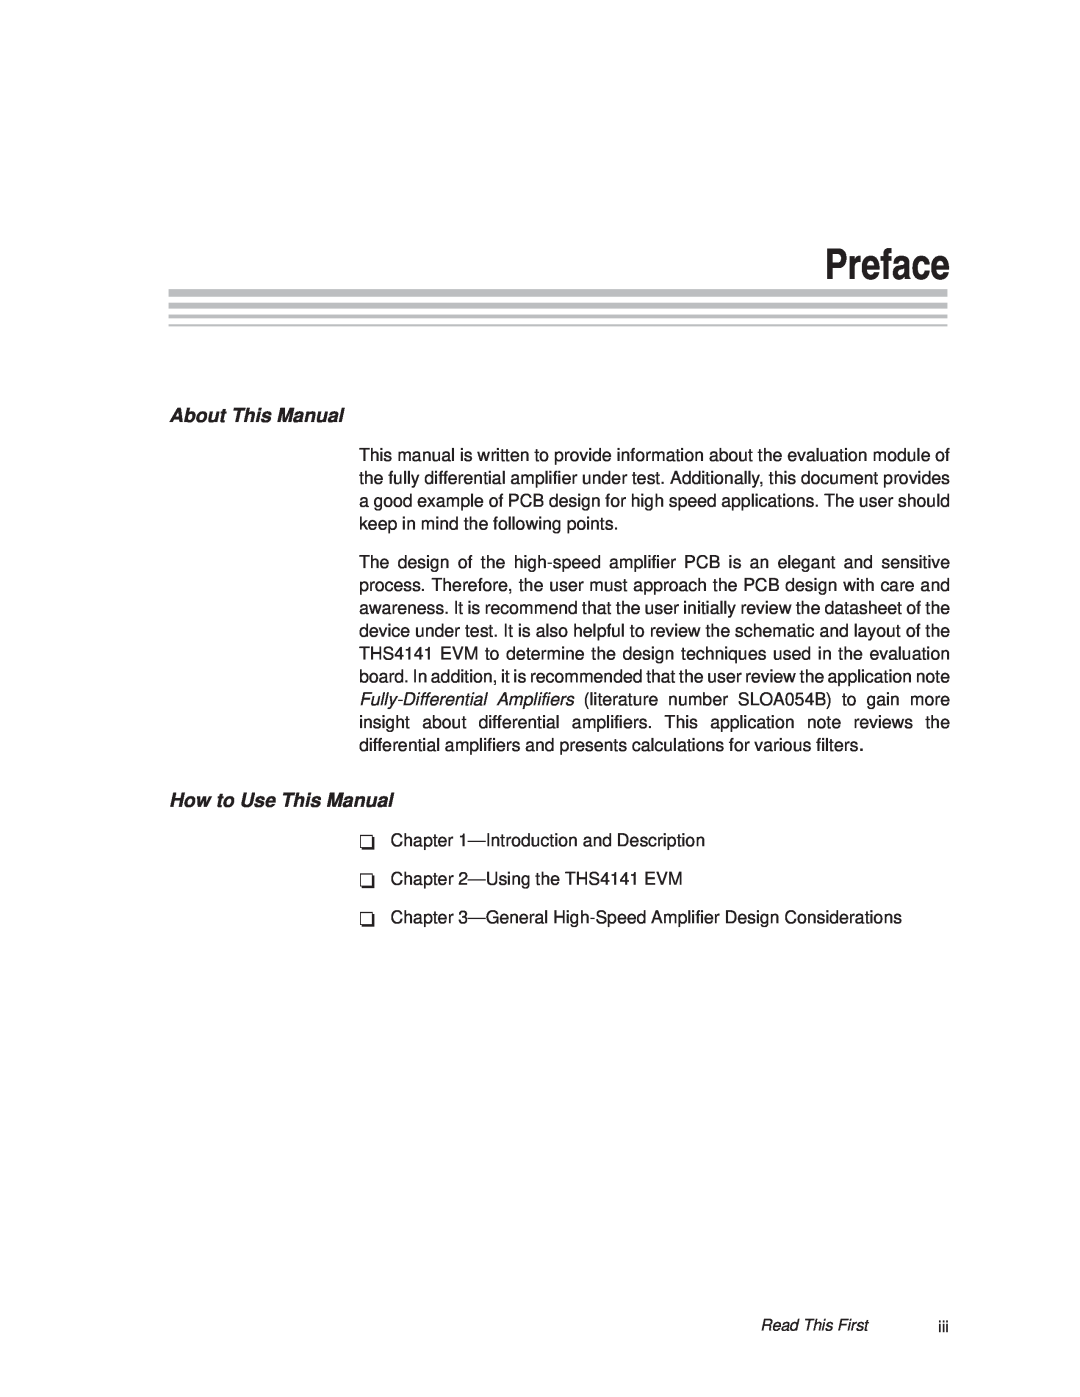 Texas Instruments THS4141 manual Preface, About This Manual, How to Use This Manual 